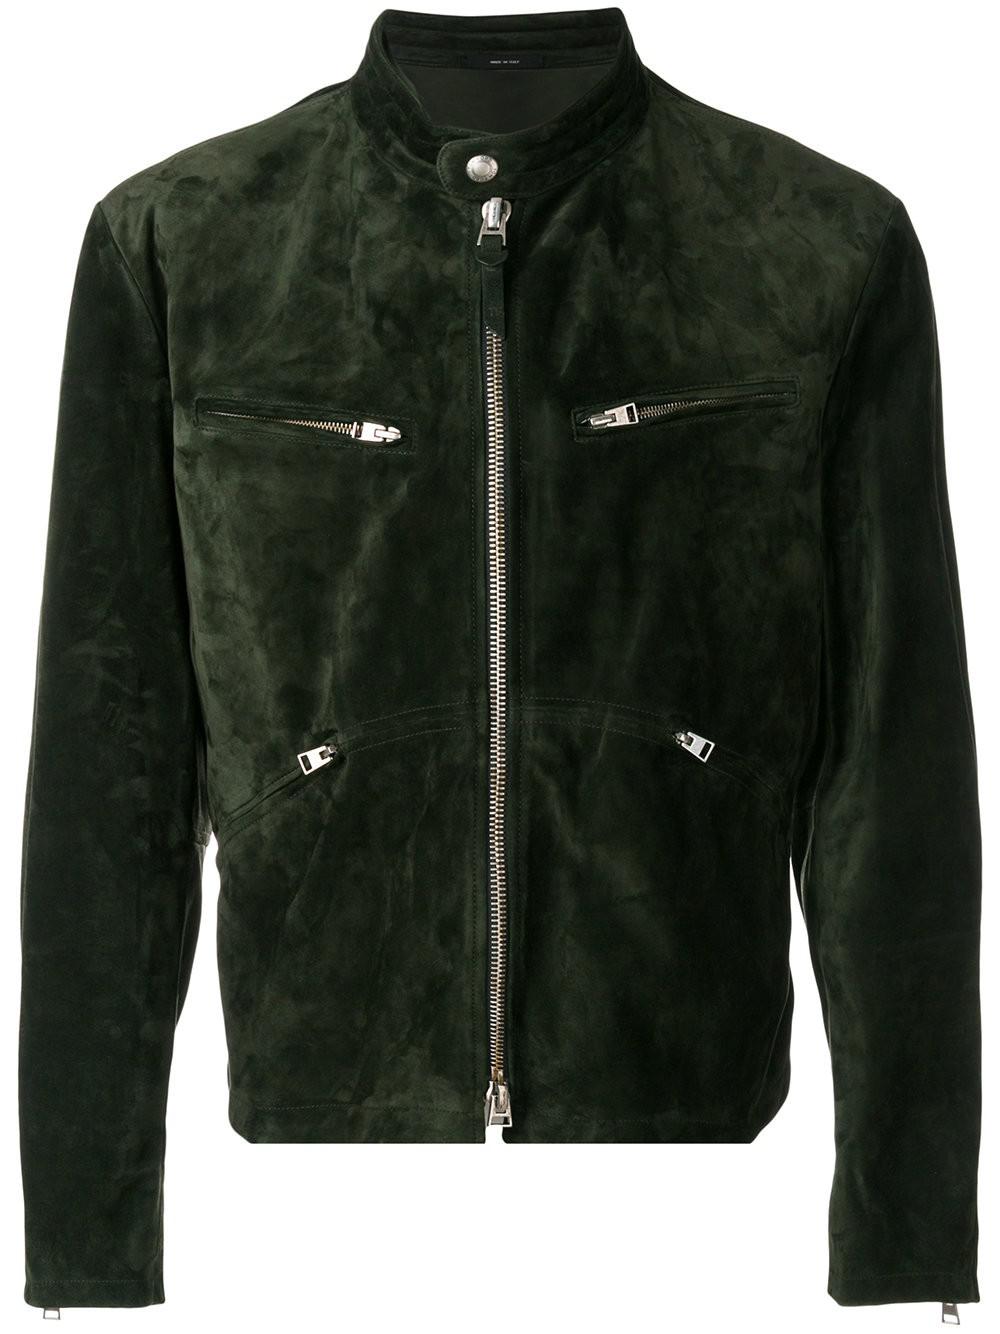 Tom Ford Suede Zipped Jacket in Black for Men - Lyst